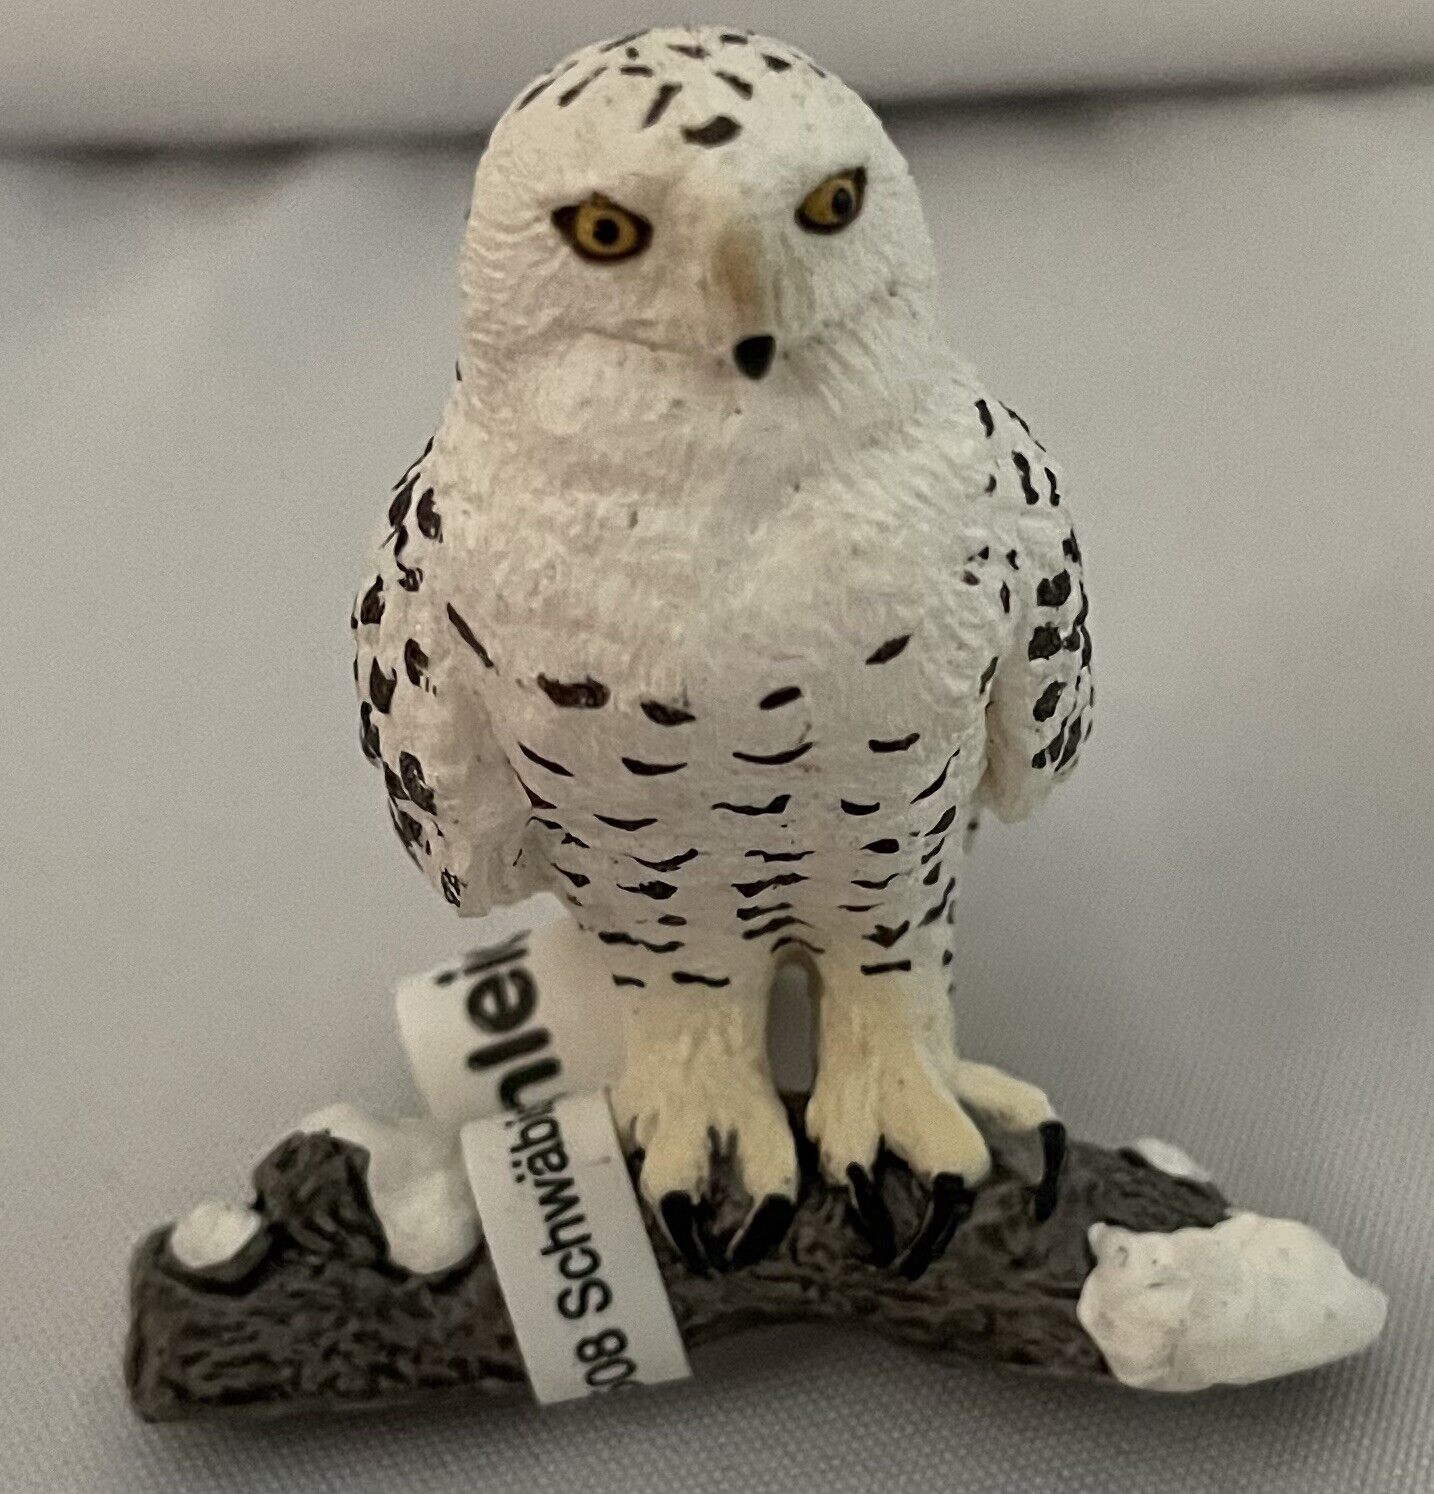 Schleich Snow Owl White & Black 2011 Retired Figure 14671 New With Tag